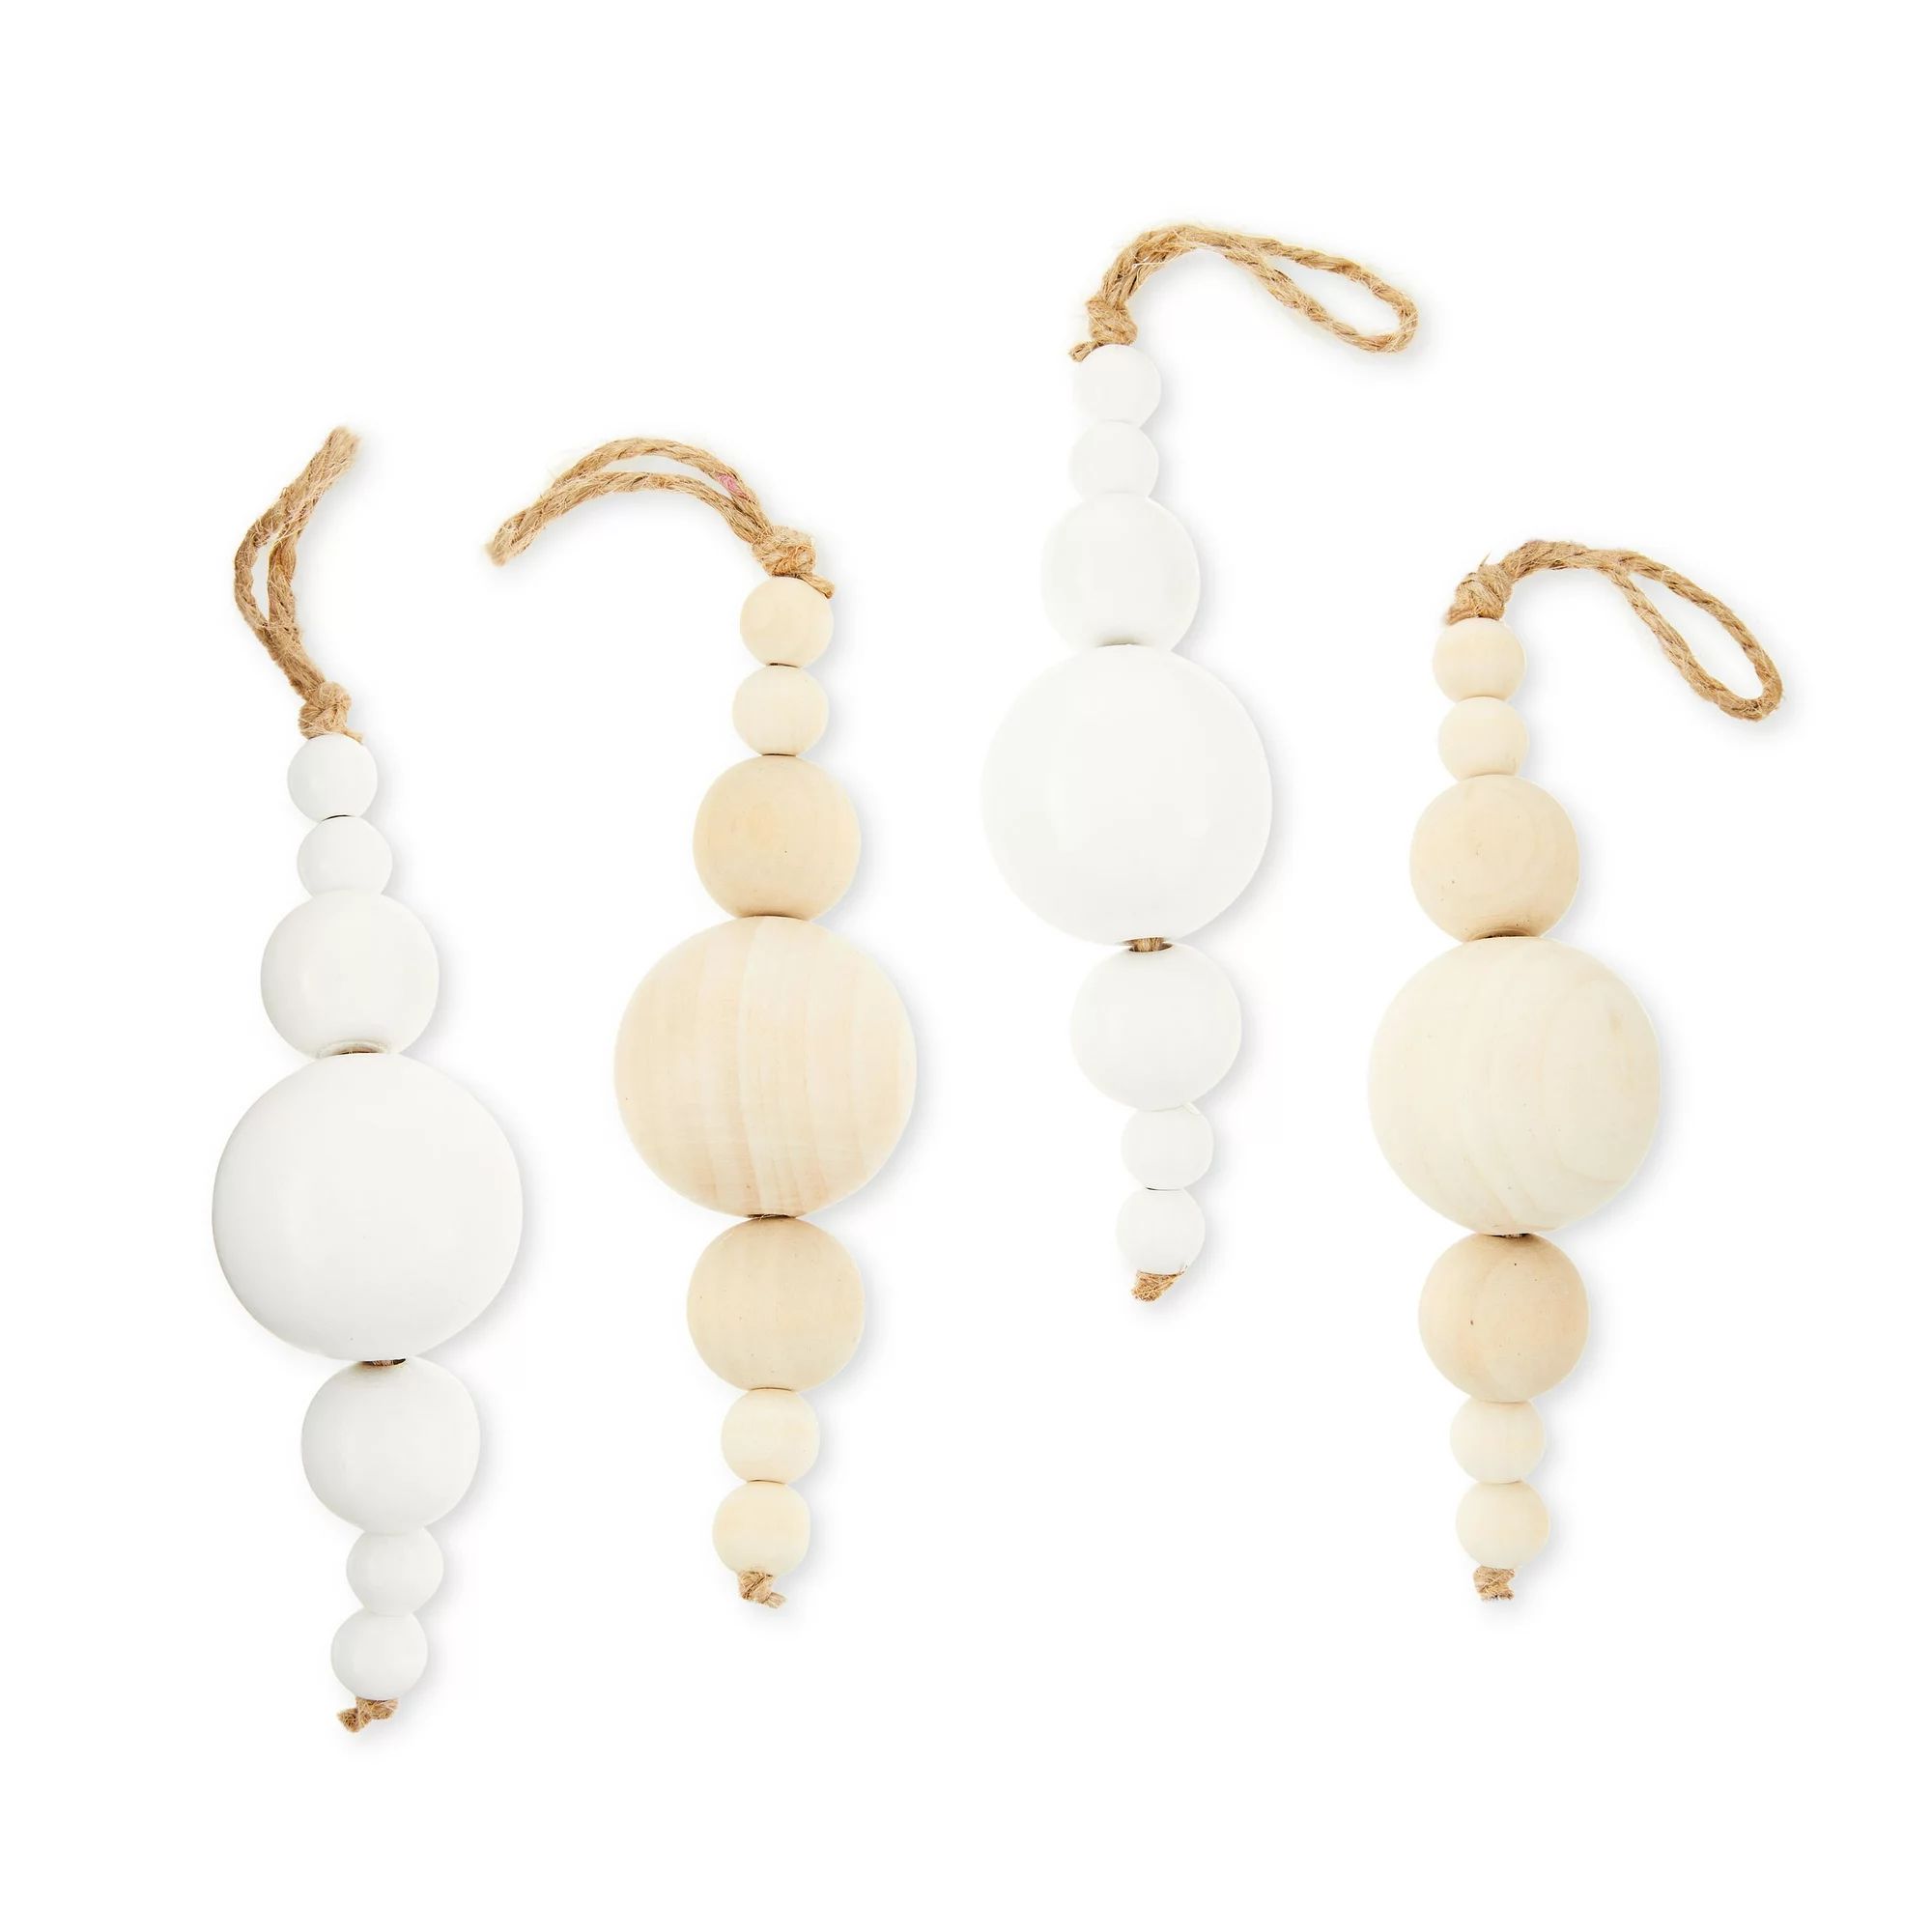 Beans Finial Ornament, Modern Merry Theme, Natural & White Color, 4 Count, 0.31kgs, Holiday Time | Walmart (US)